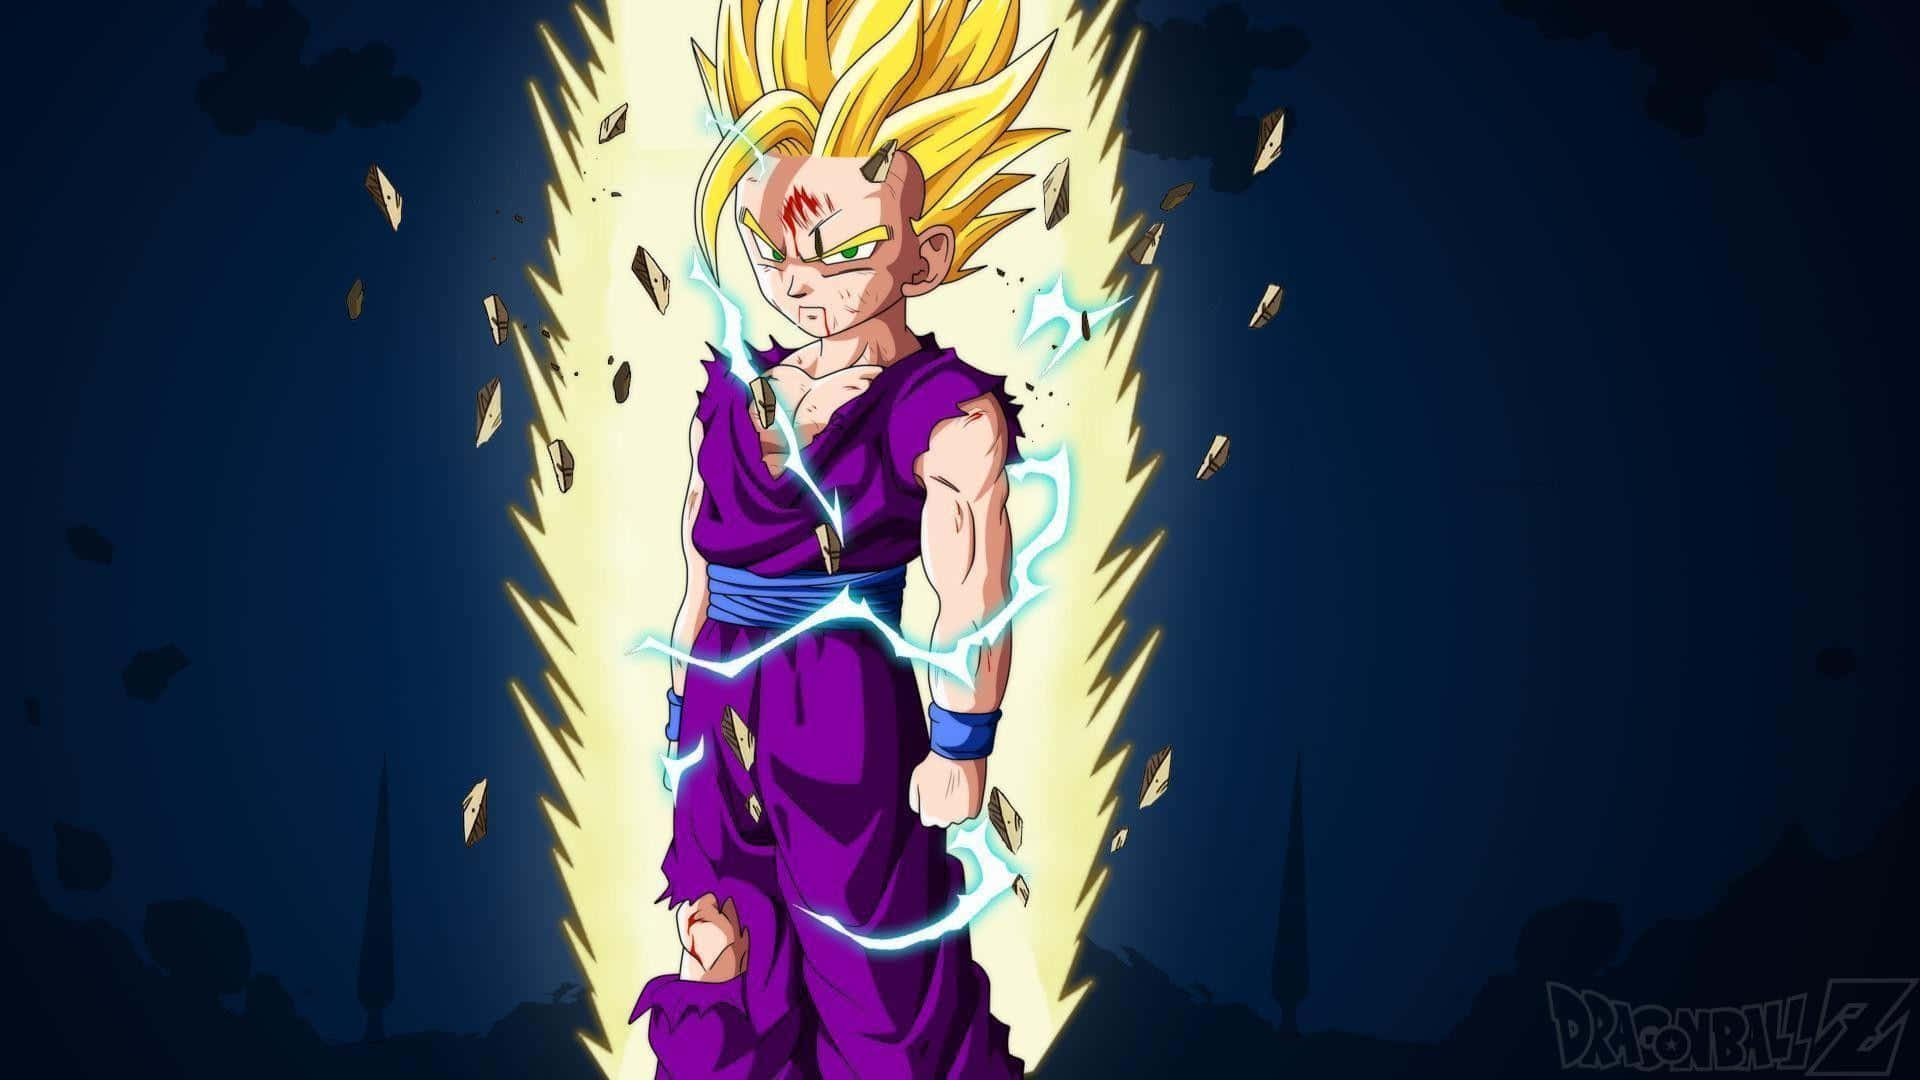 Strength and courage abound in Teen Gohan Wallpaper